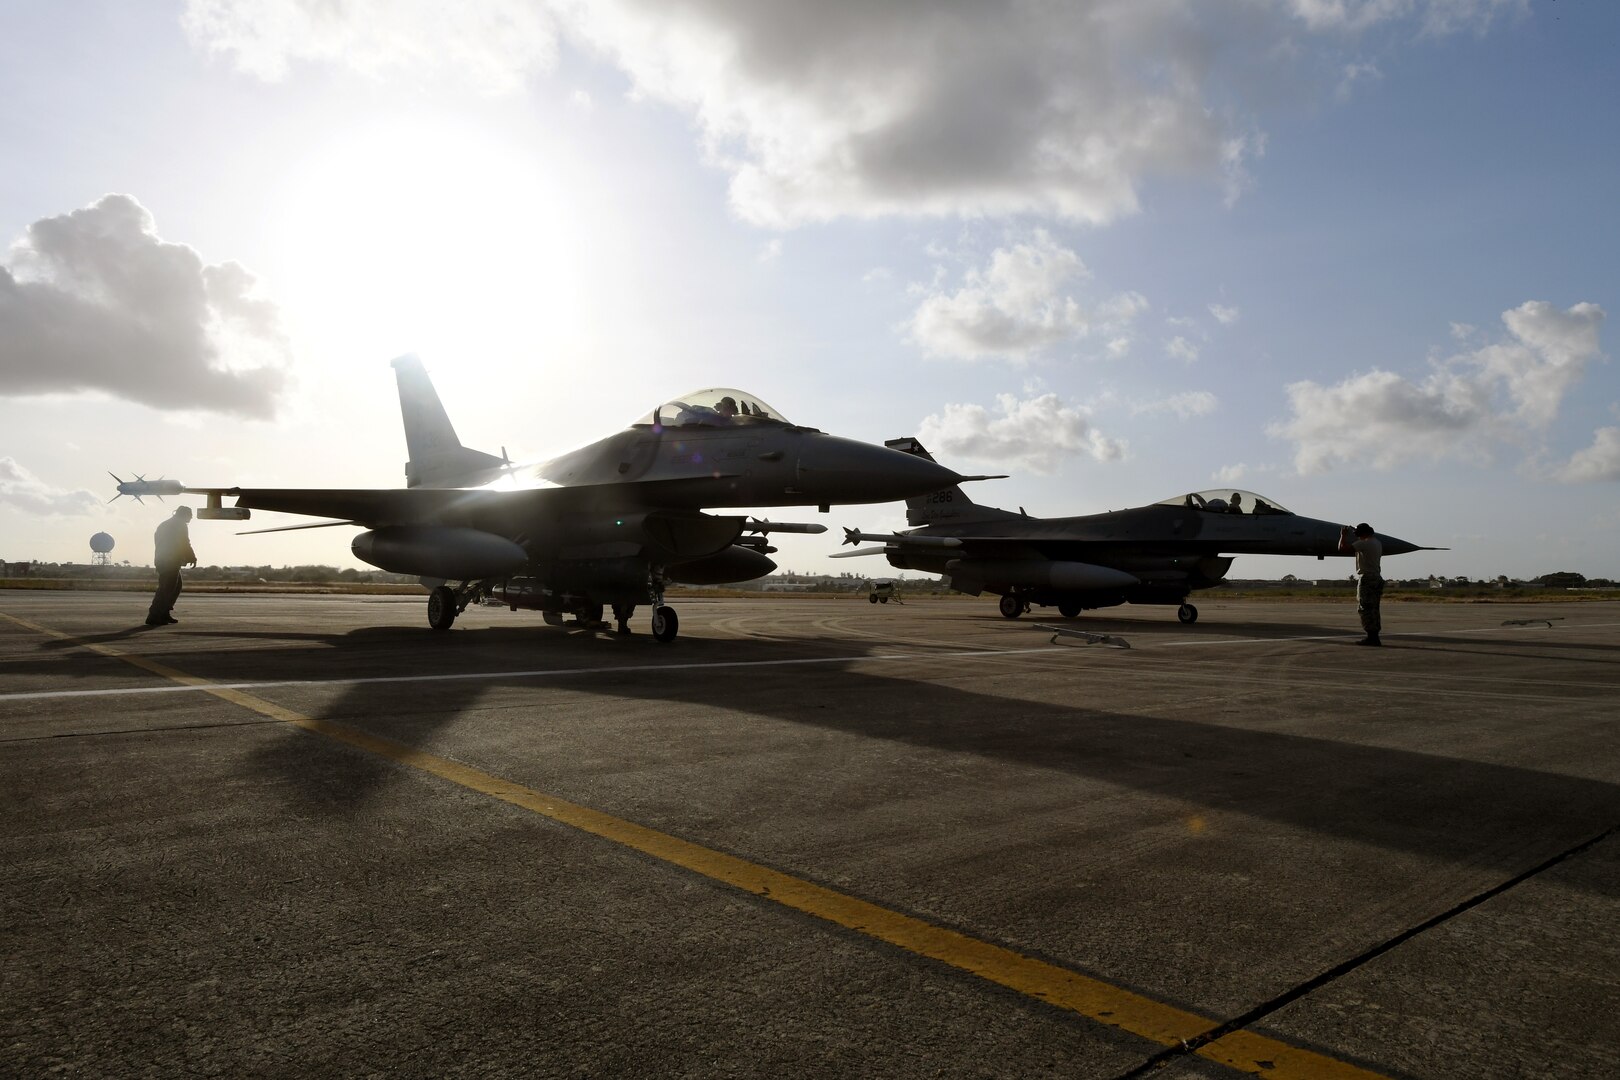 Two F-16 Fighting Falcons from the 149th Fighter Wing, Air National Guard, line the apron at Natal Air Force Base in Natal, Brazil, Nov. 16, 2018.